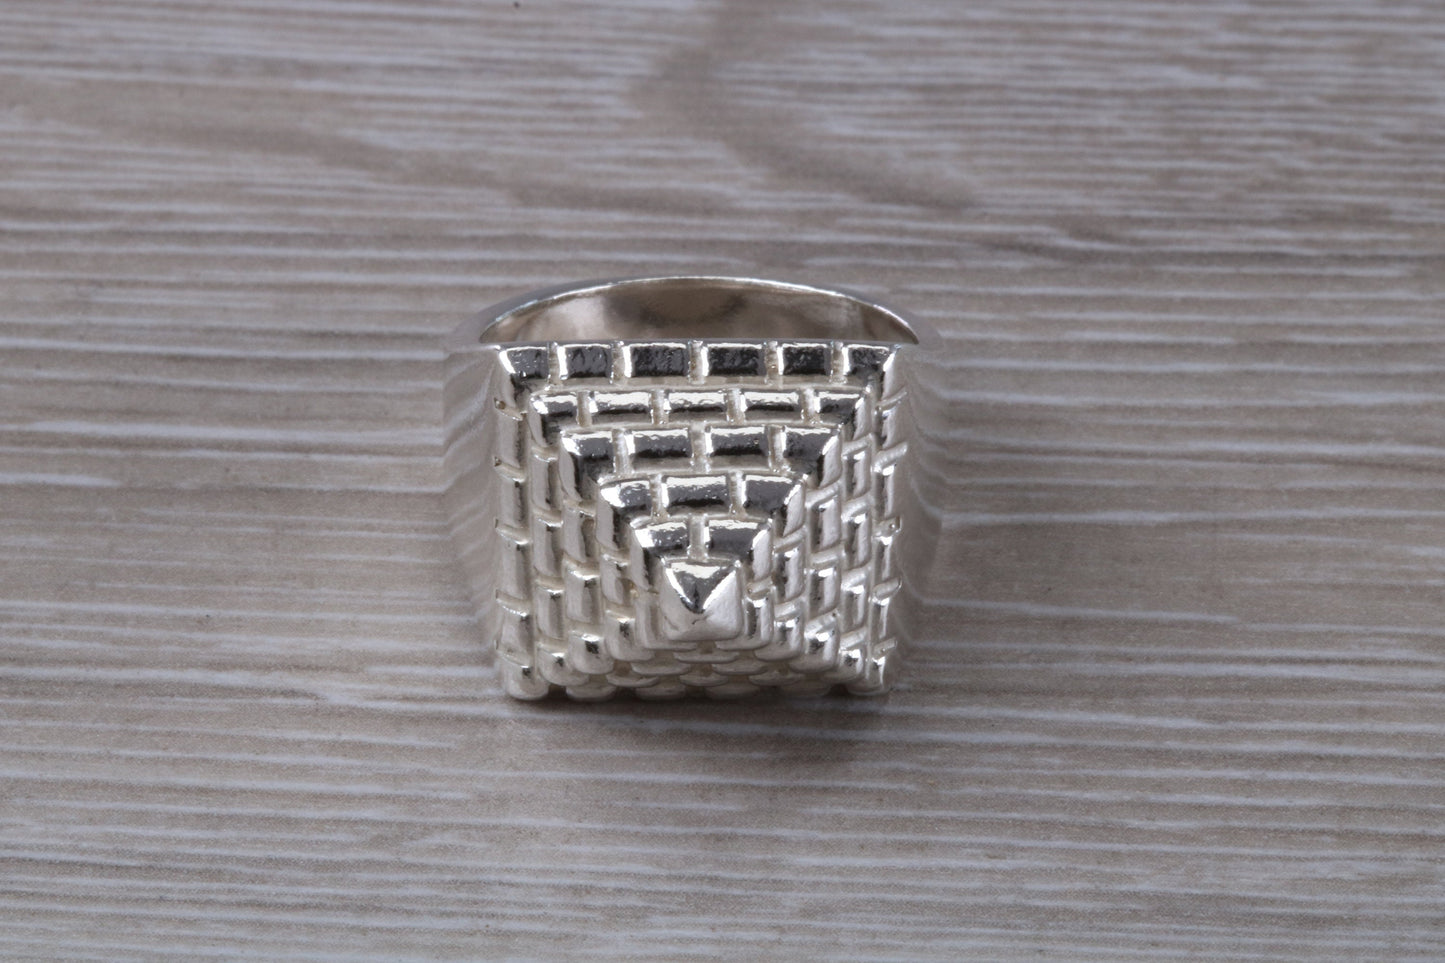 Large and very heavy Pyramid ring,solid silver, perfect for ladies and gents. Available in silver, yellow gold, white gold and platinum